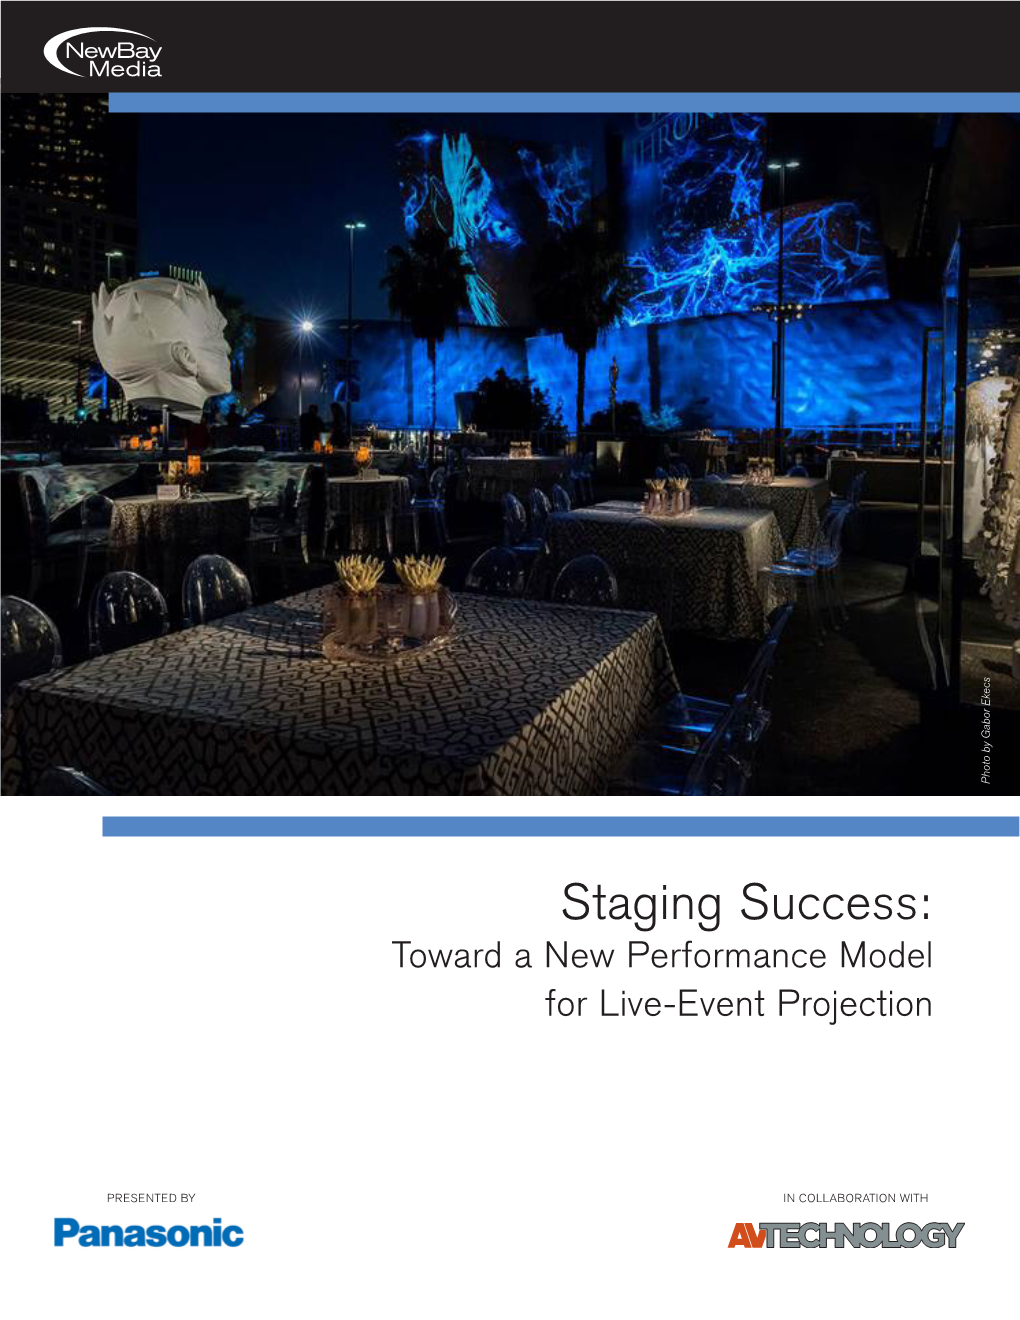 Staging Success: Toward a New Performance Model for Live-Event Projection